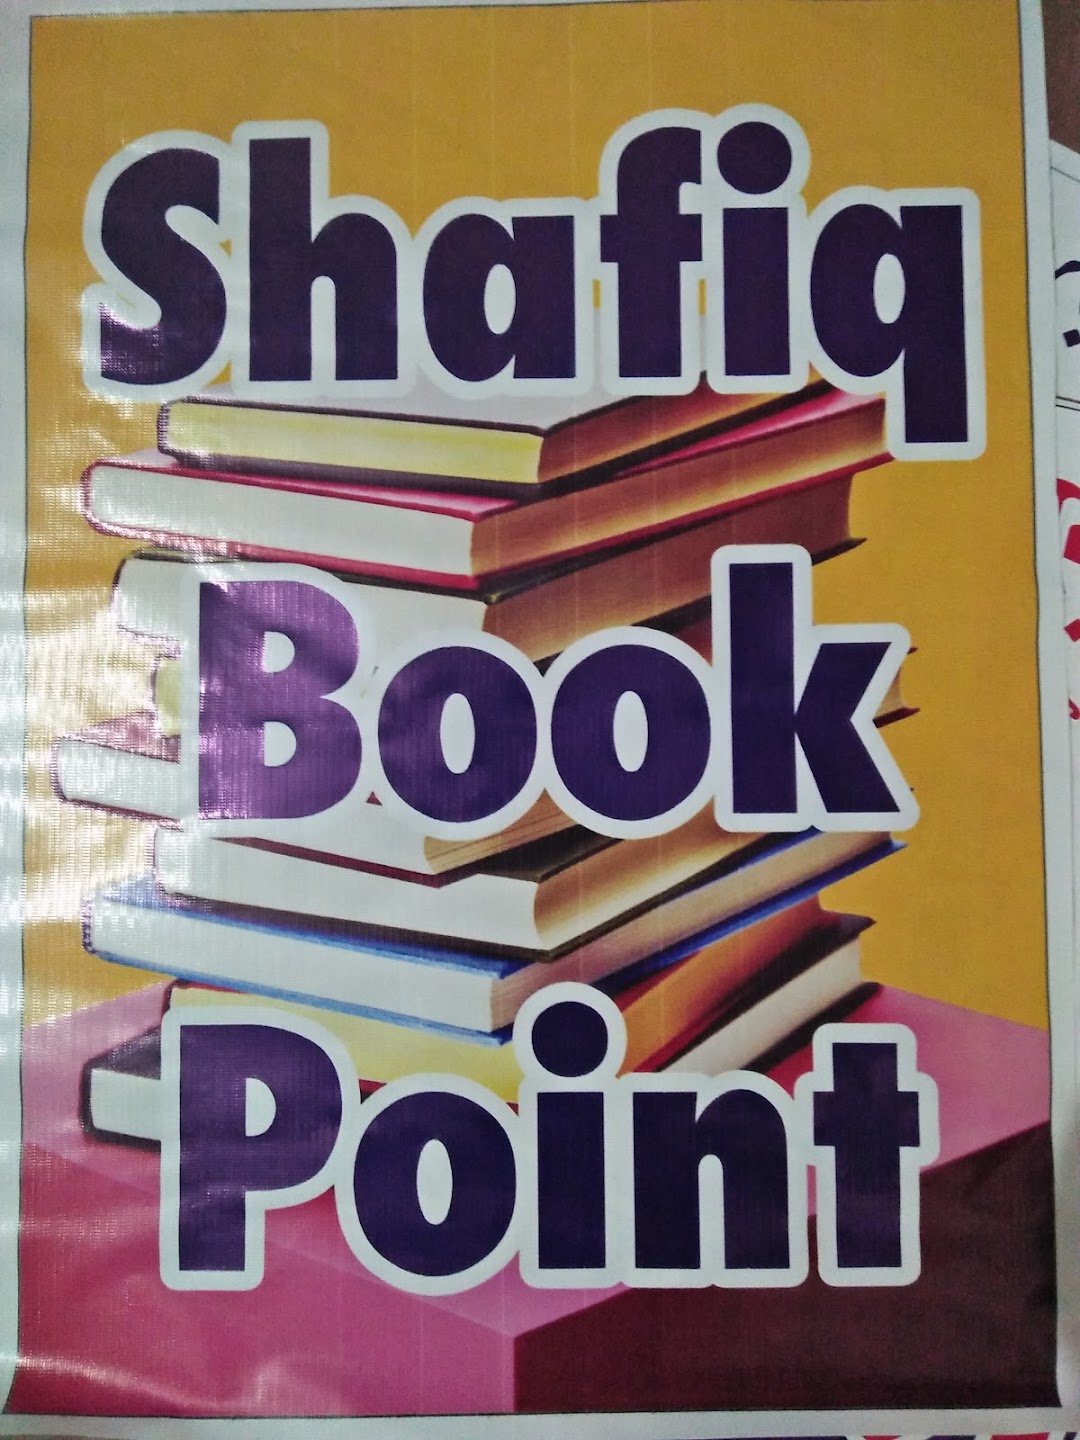 Shafiq Book Point and Stationers